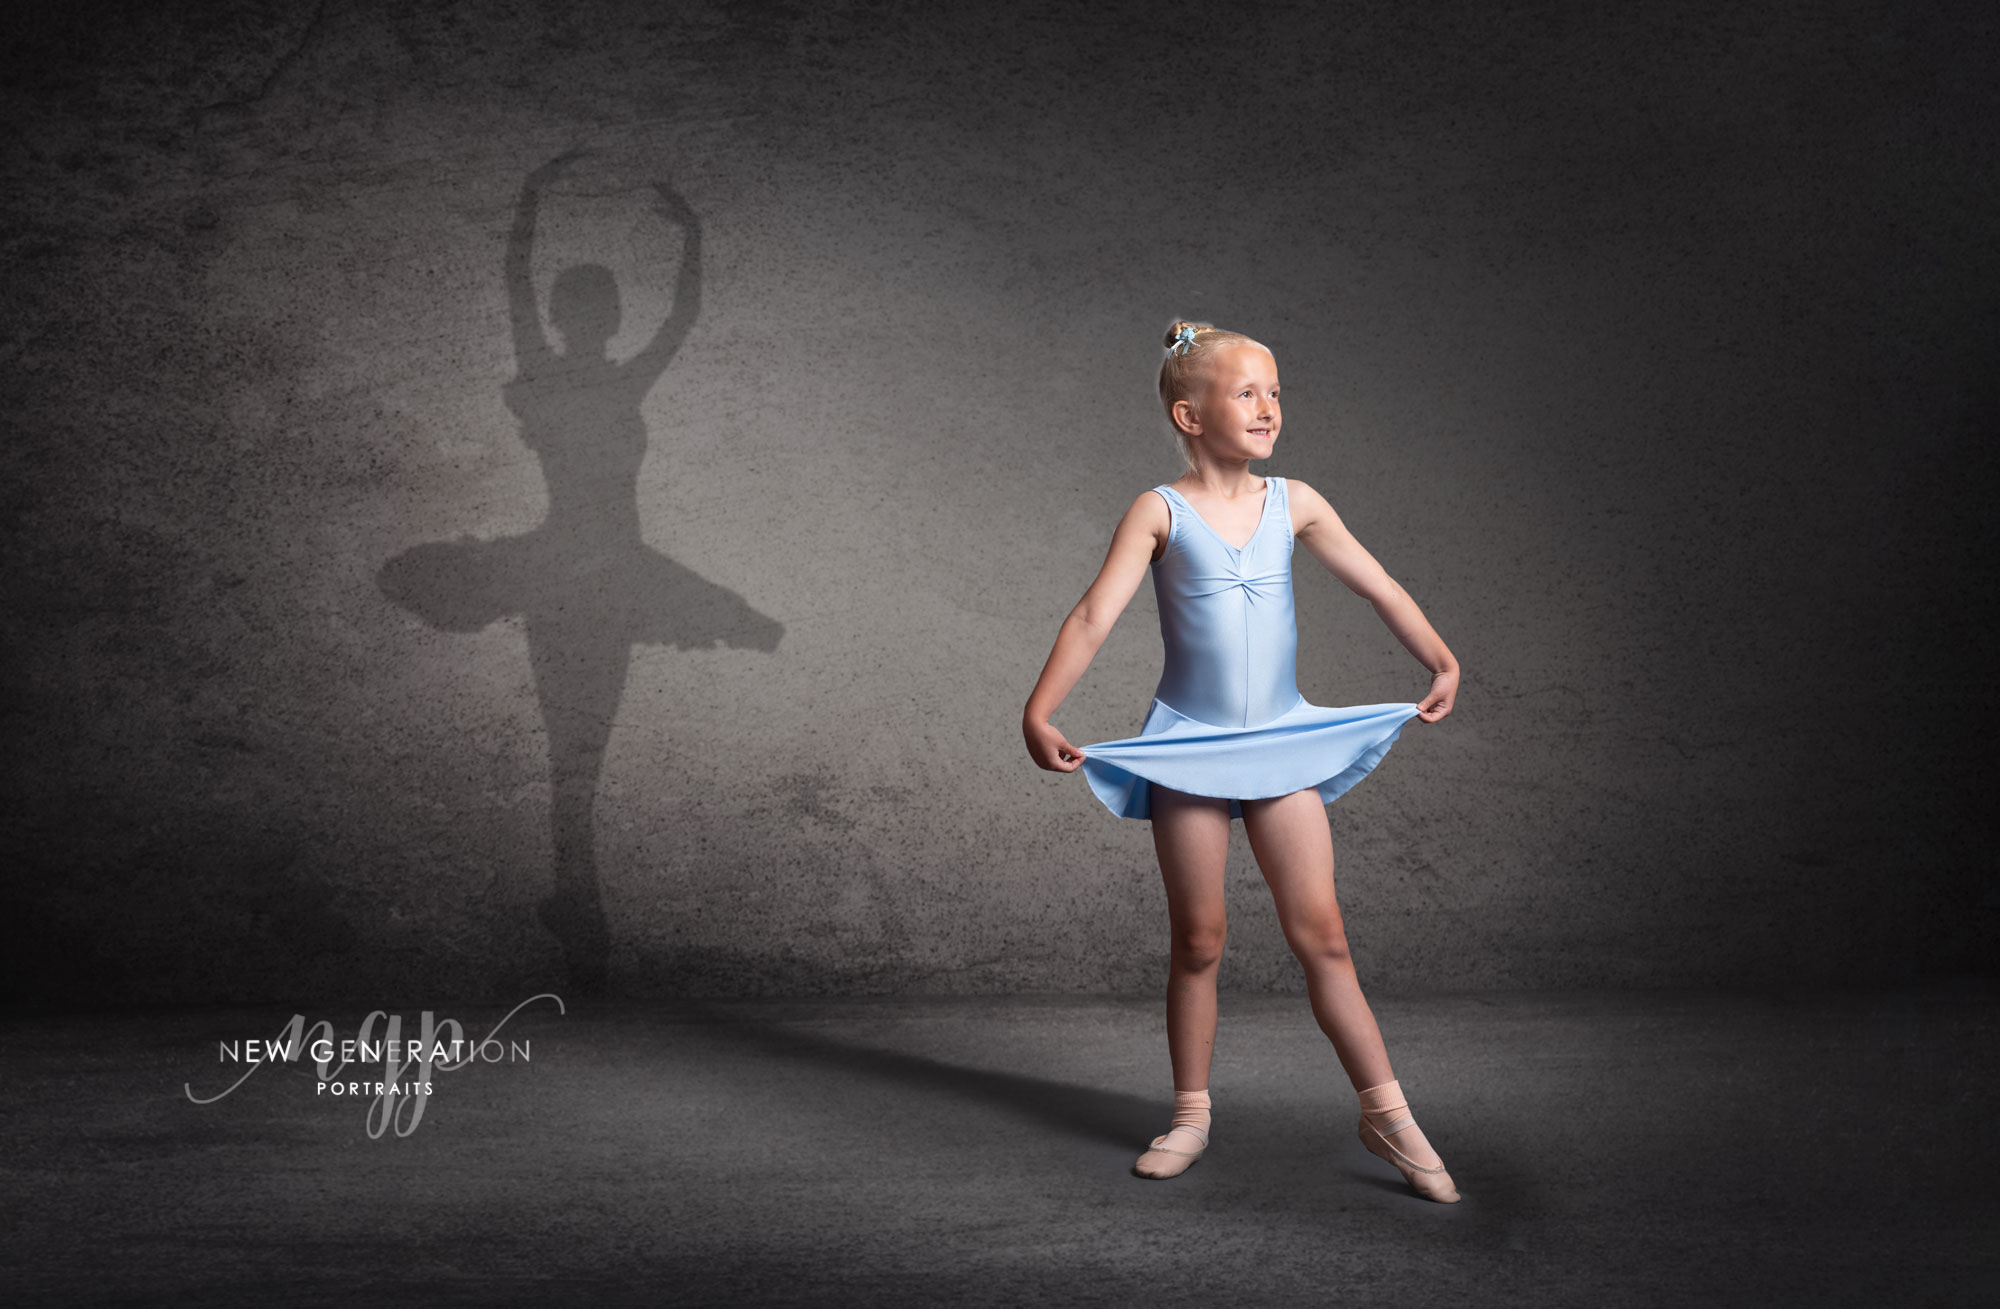 Child Ballet dancer holding a pose with her shadow as a Prima ballerina .